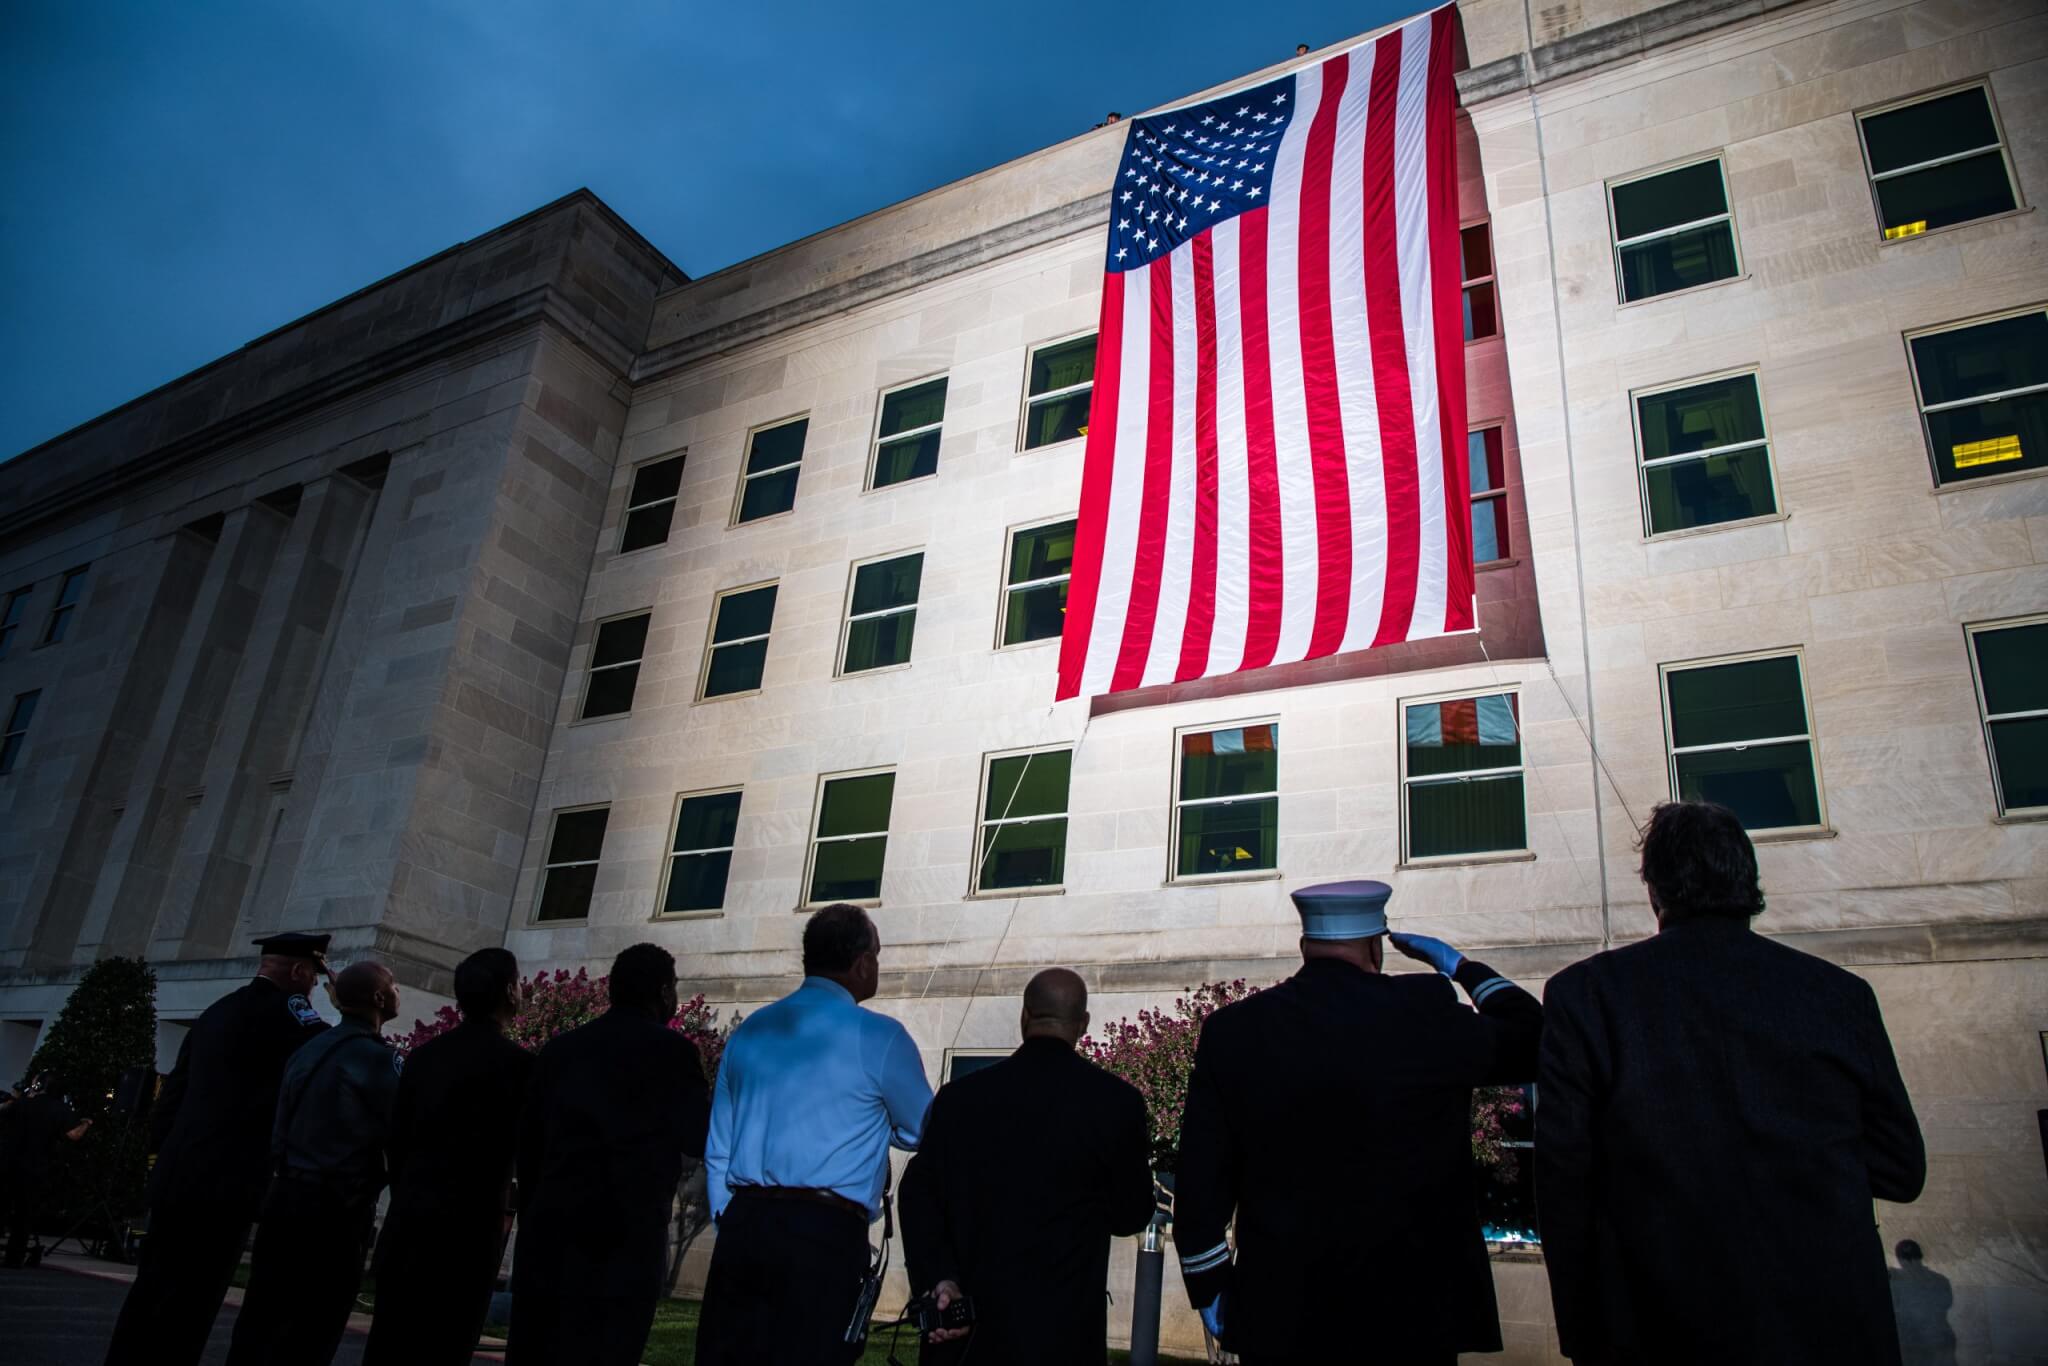 A Pentagon crew unfurls an American flag at dawn at the Pentagon, on the 18th anniversary of the 9/11 attacks, Washington, D.C., Sept. 11, 2019. (DoD photo by U.S. Army Staff Sgt. Nicole Mejia)